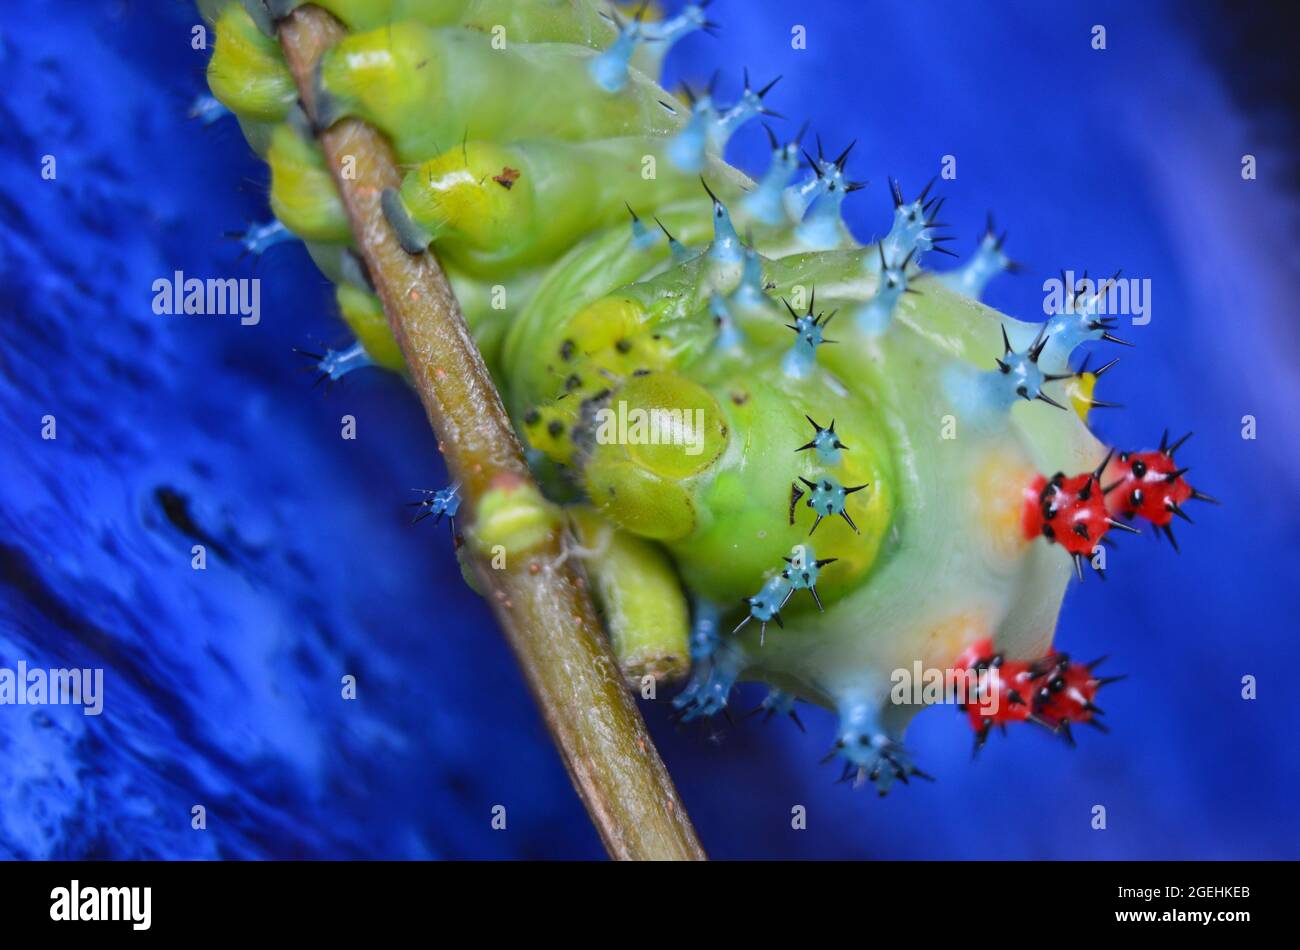 Bright green and blue cecropia caterpillar  on twig macro up close with blue background Stock Photo